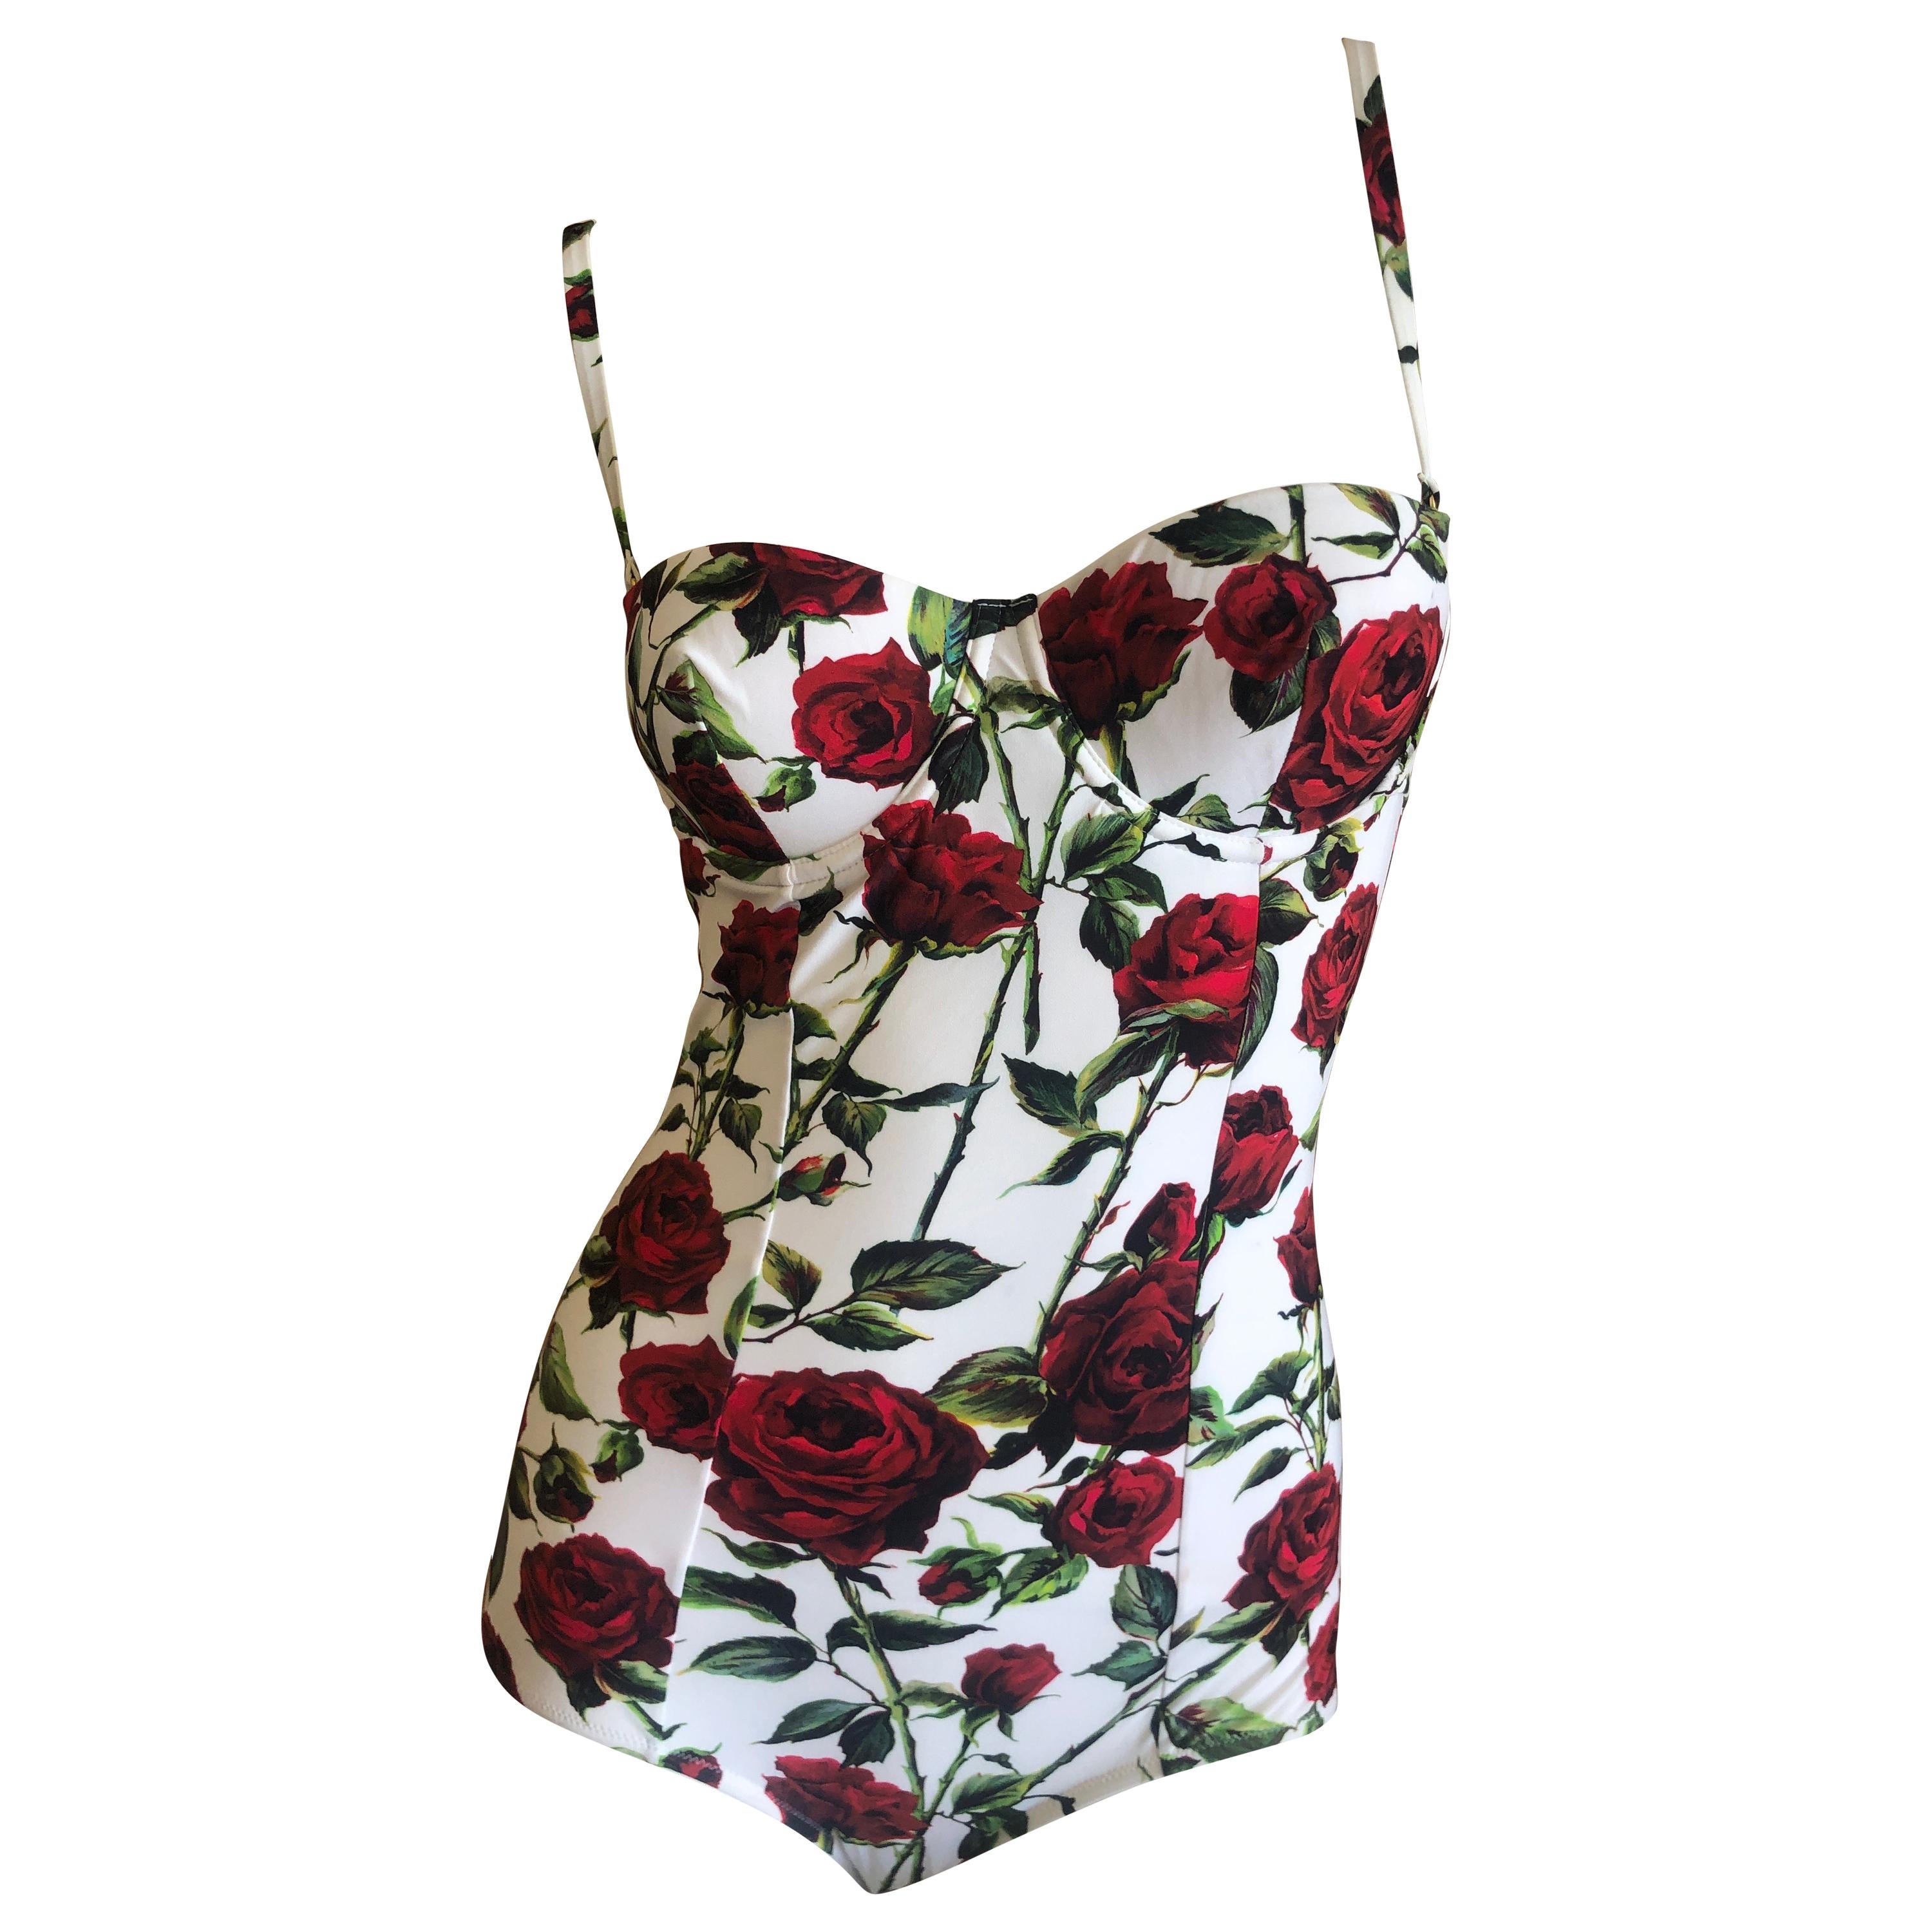 Dolce & Gabbana Floral One Piece Swimsuit NWT Size Small For Sale